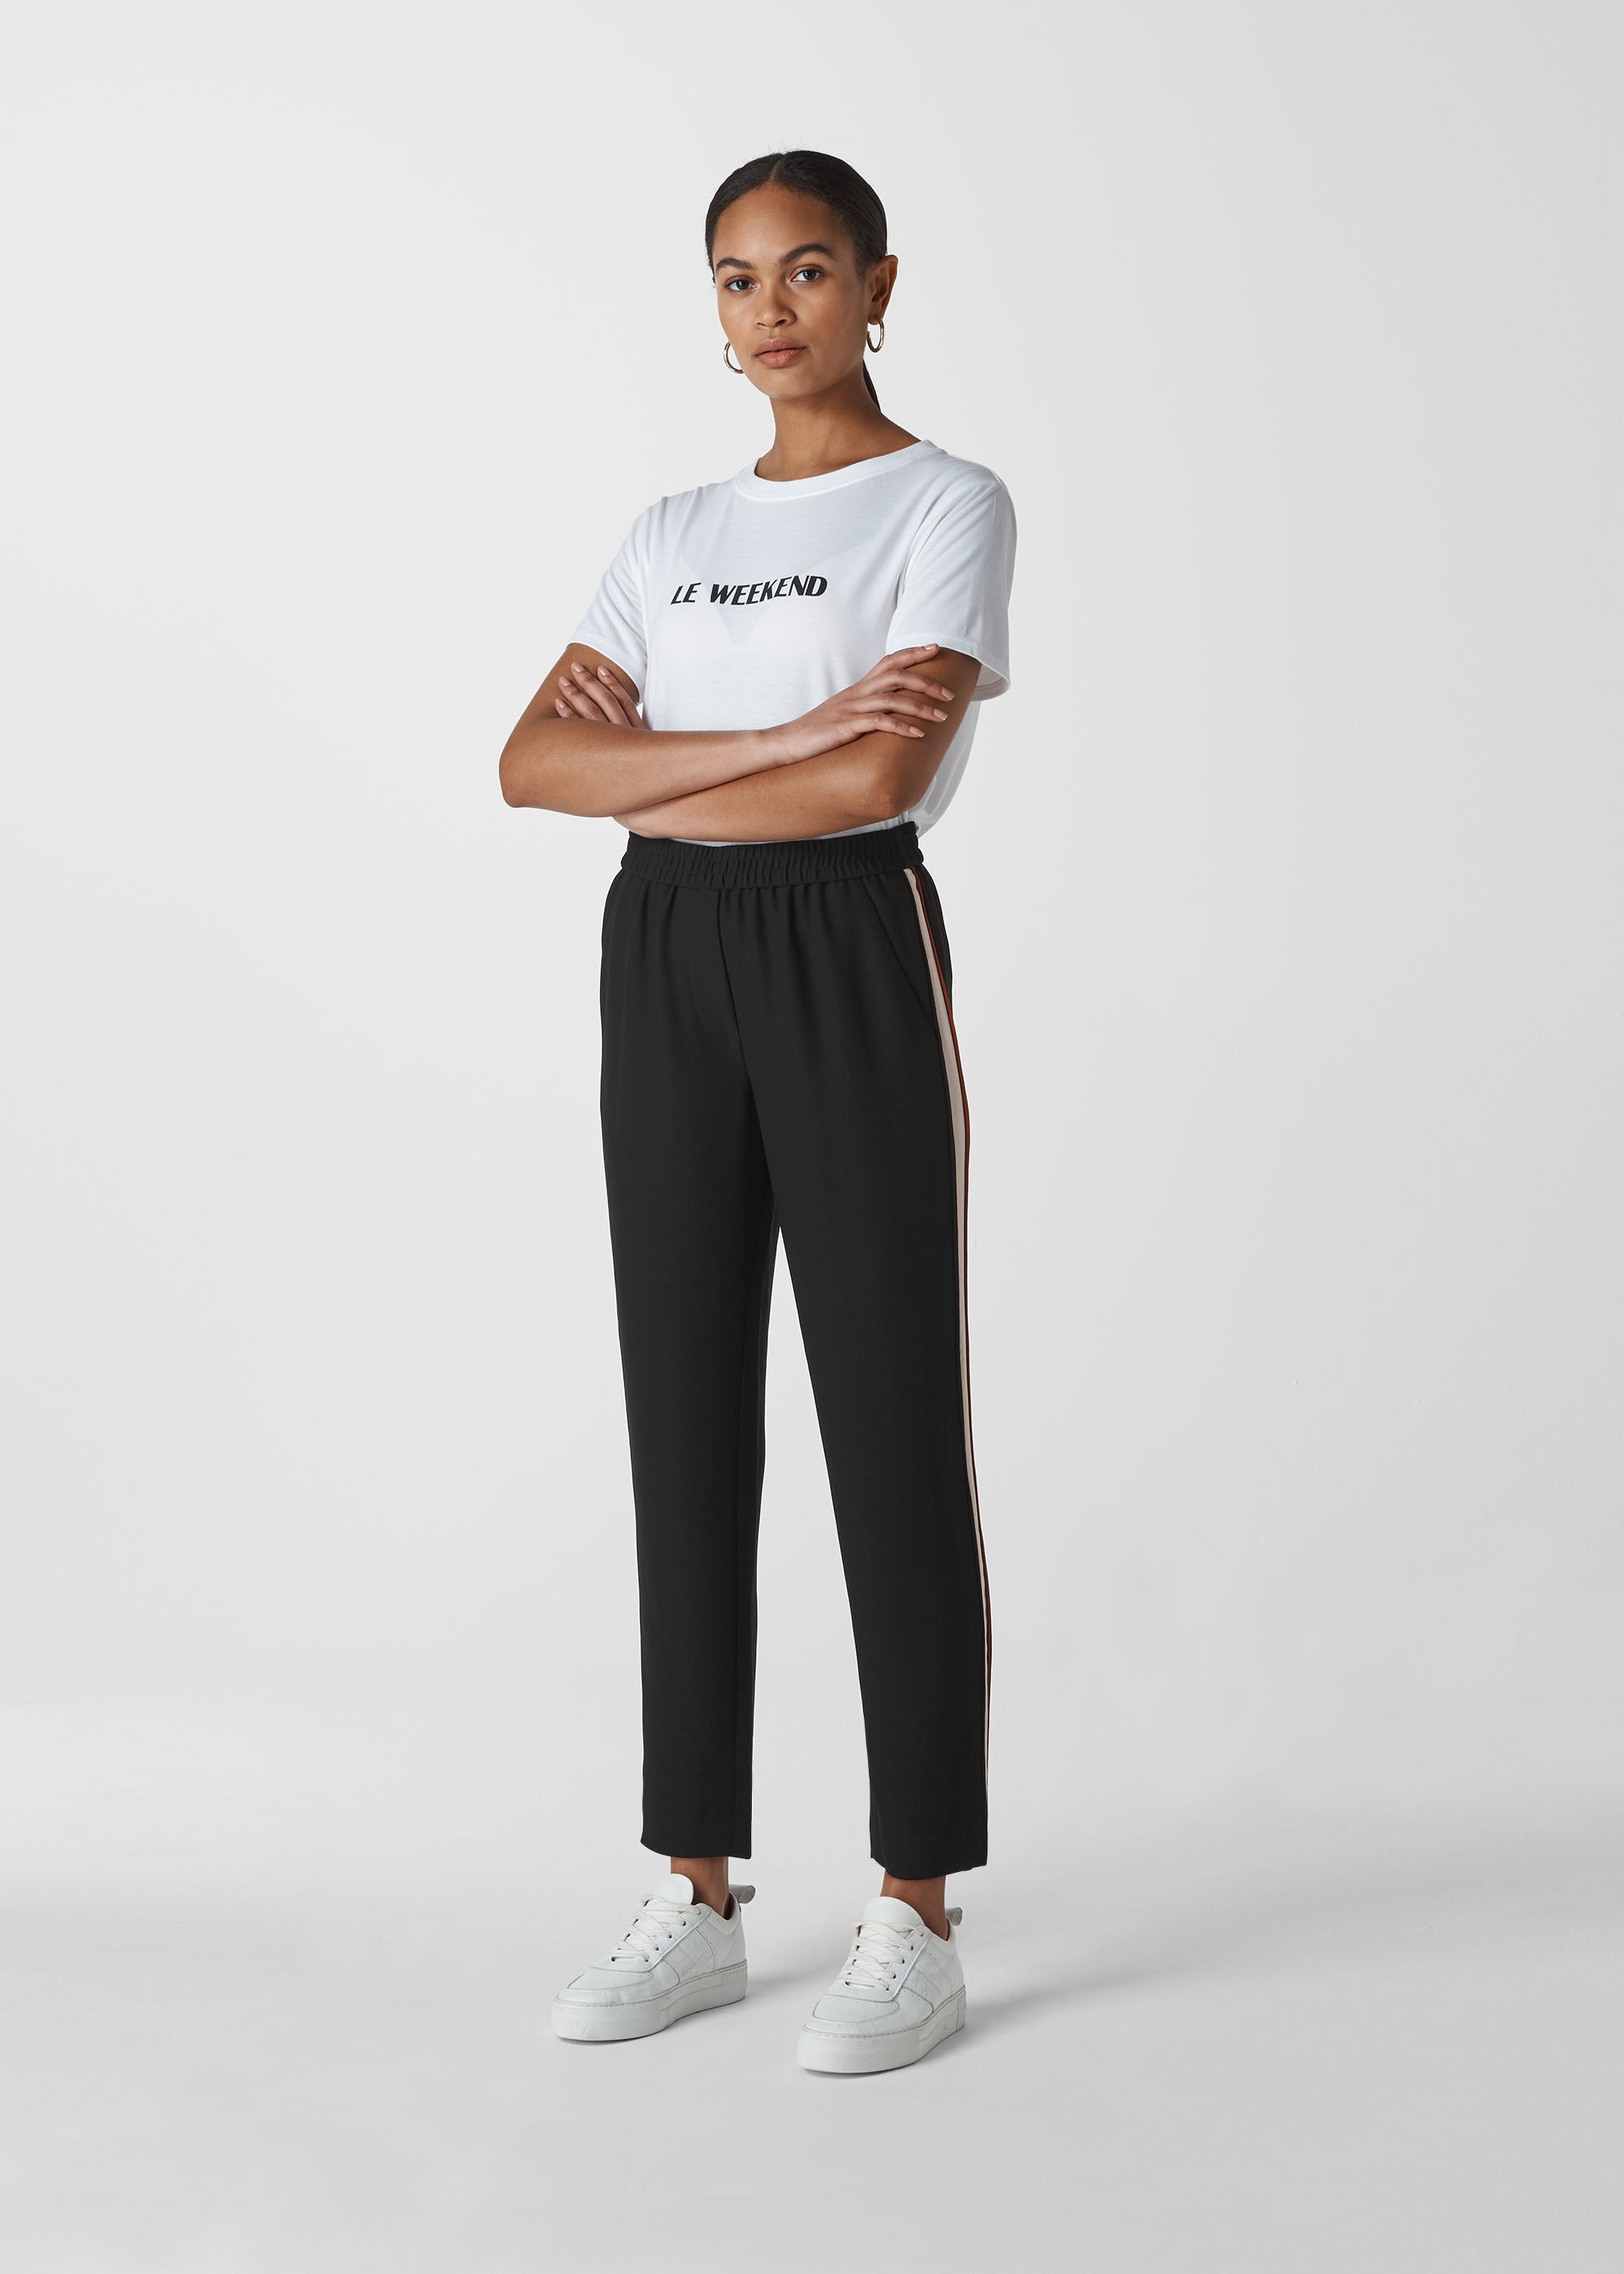 ASOS DESIGN elastic waist tailored trouser in amber with ivory side stripe   ASOS